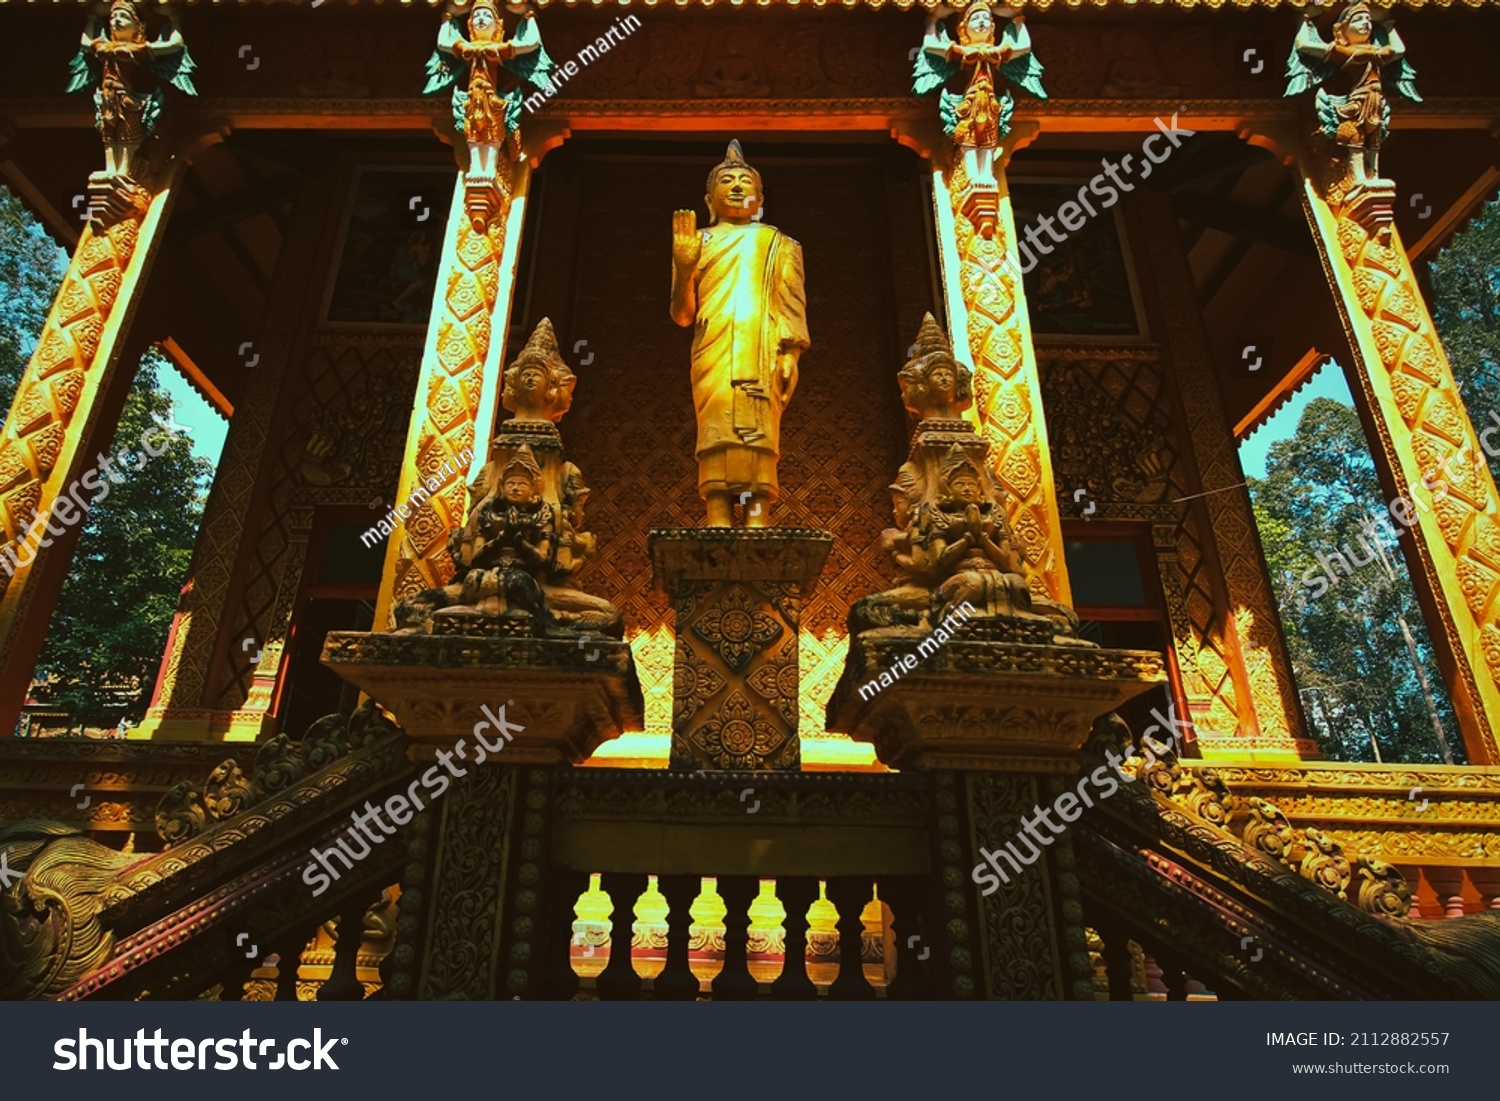 Low angle view of Chua Phu Ly, a Khmer or Cambodian Buddhist temple in Can tho, Vietnam #2112882557